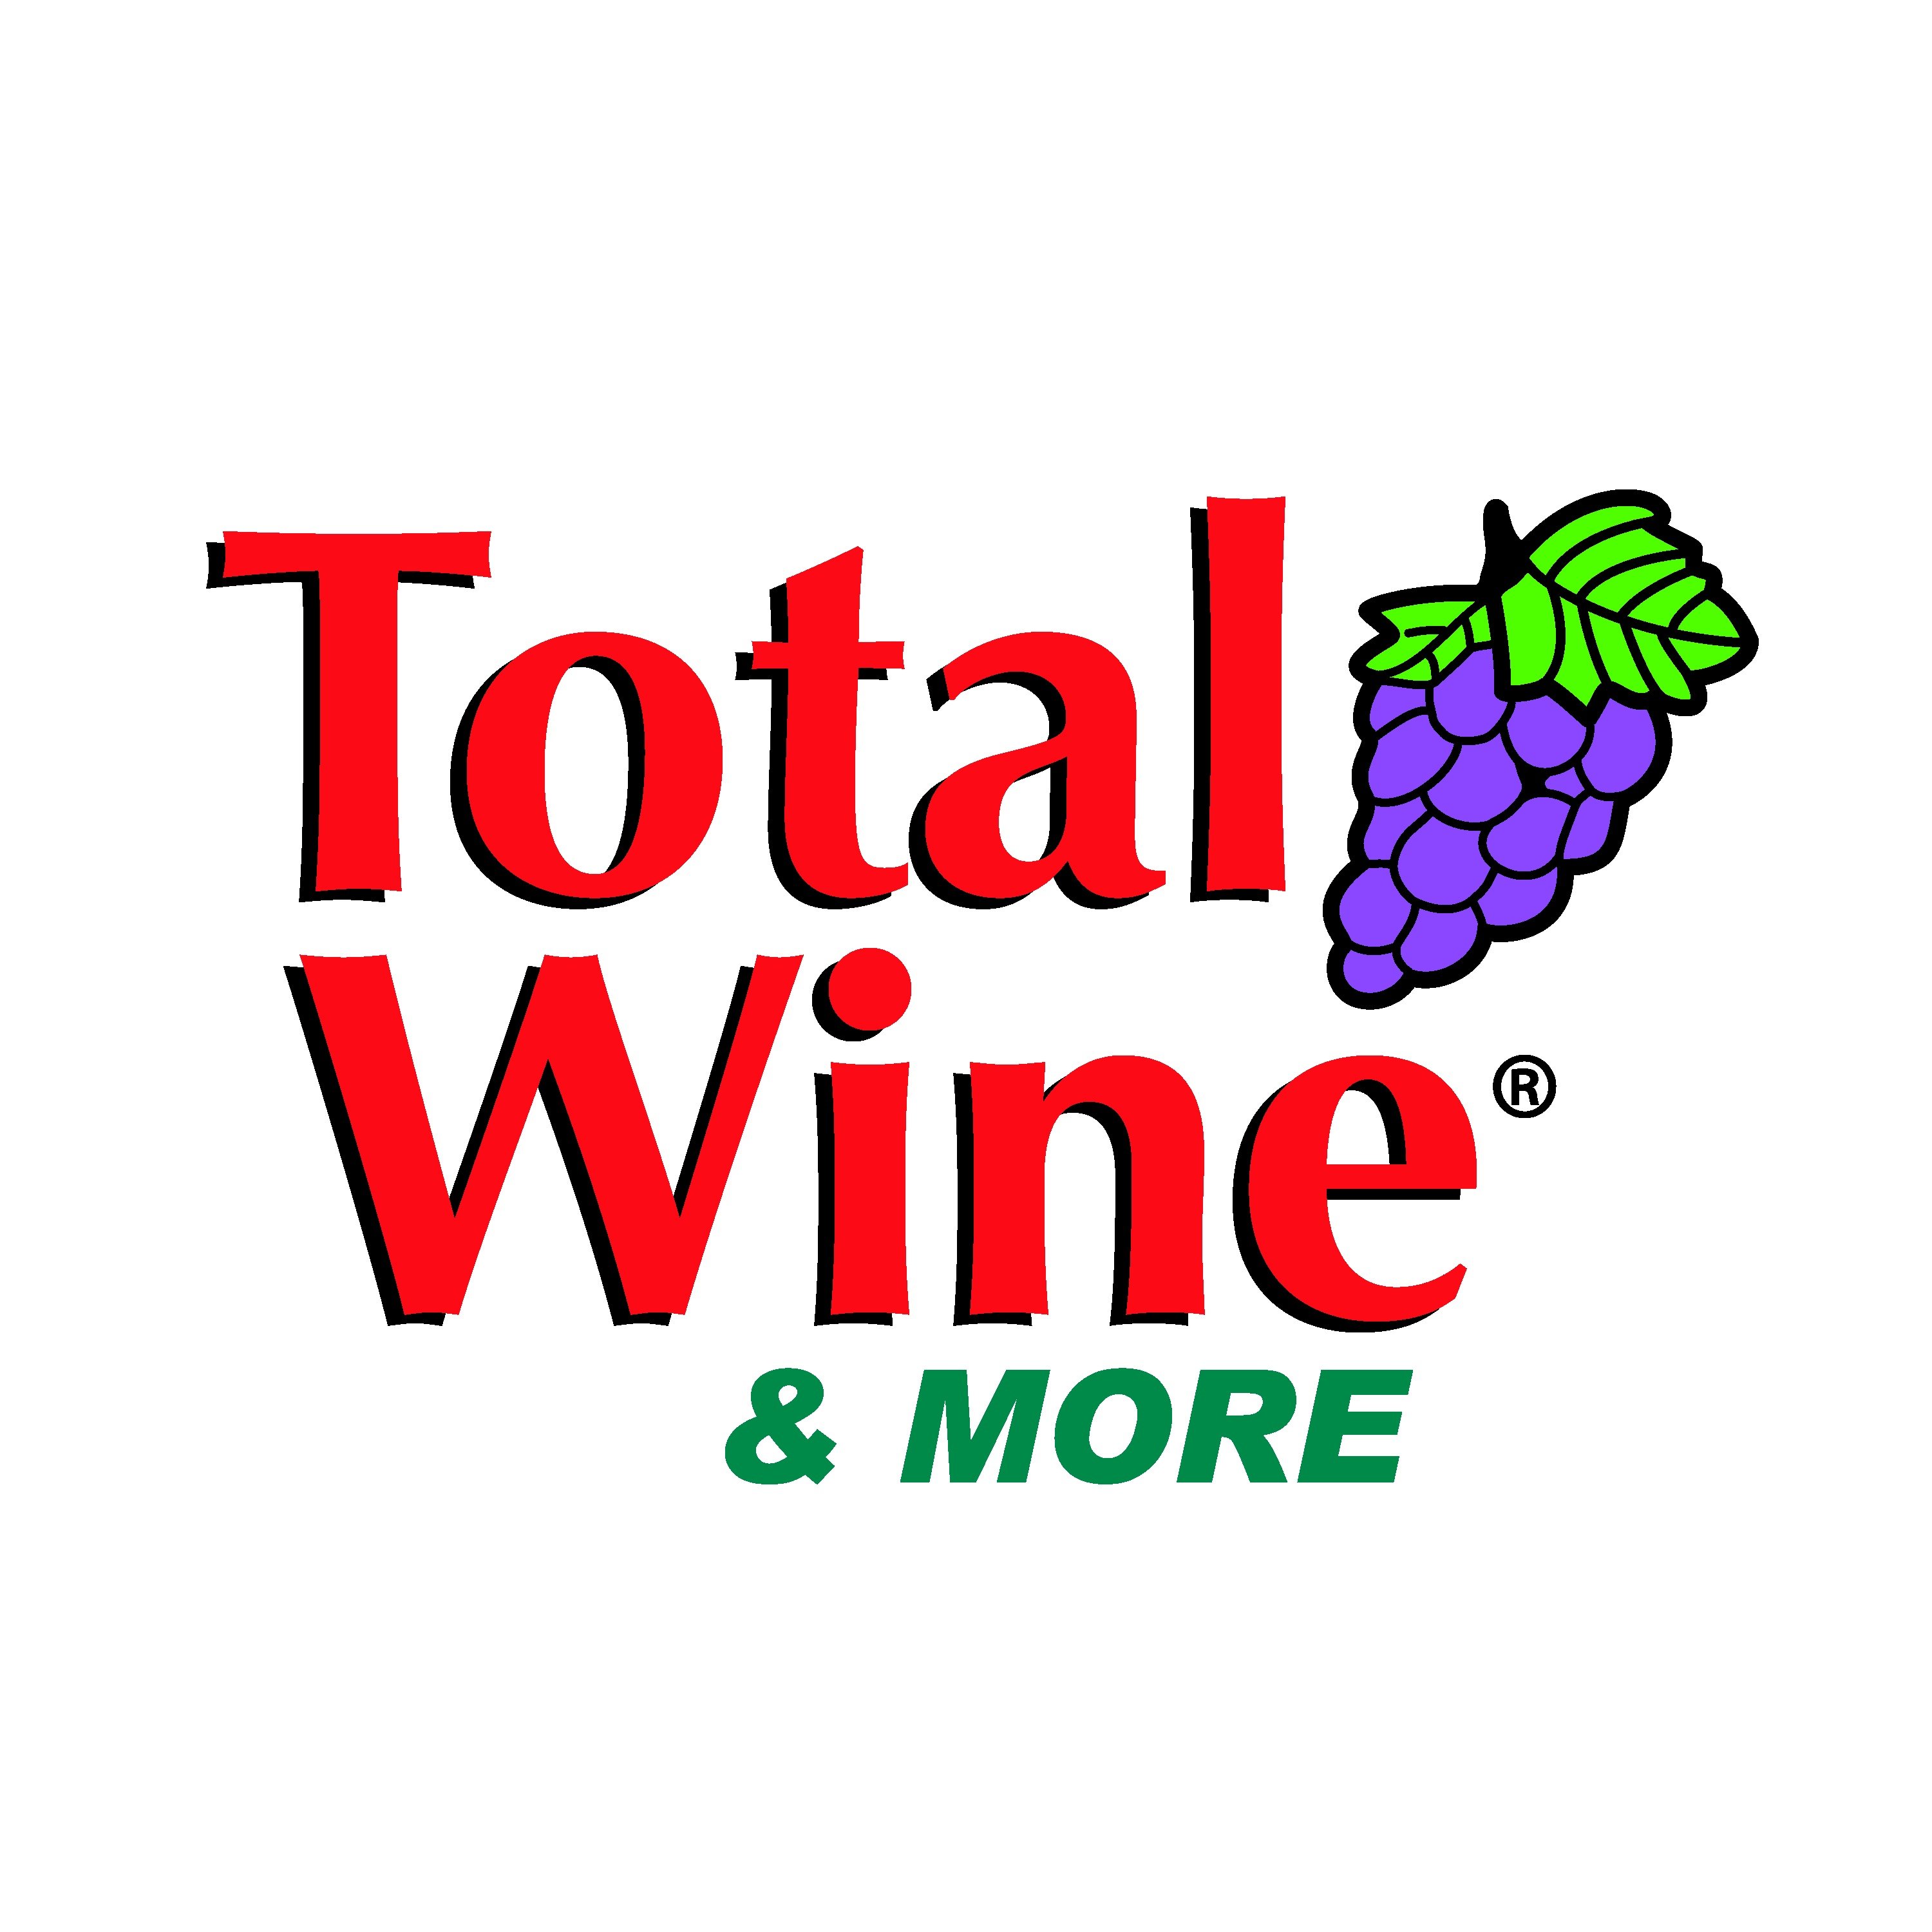 AMEX offers: TotalWine.com $30 off $150